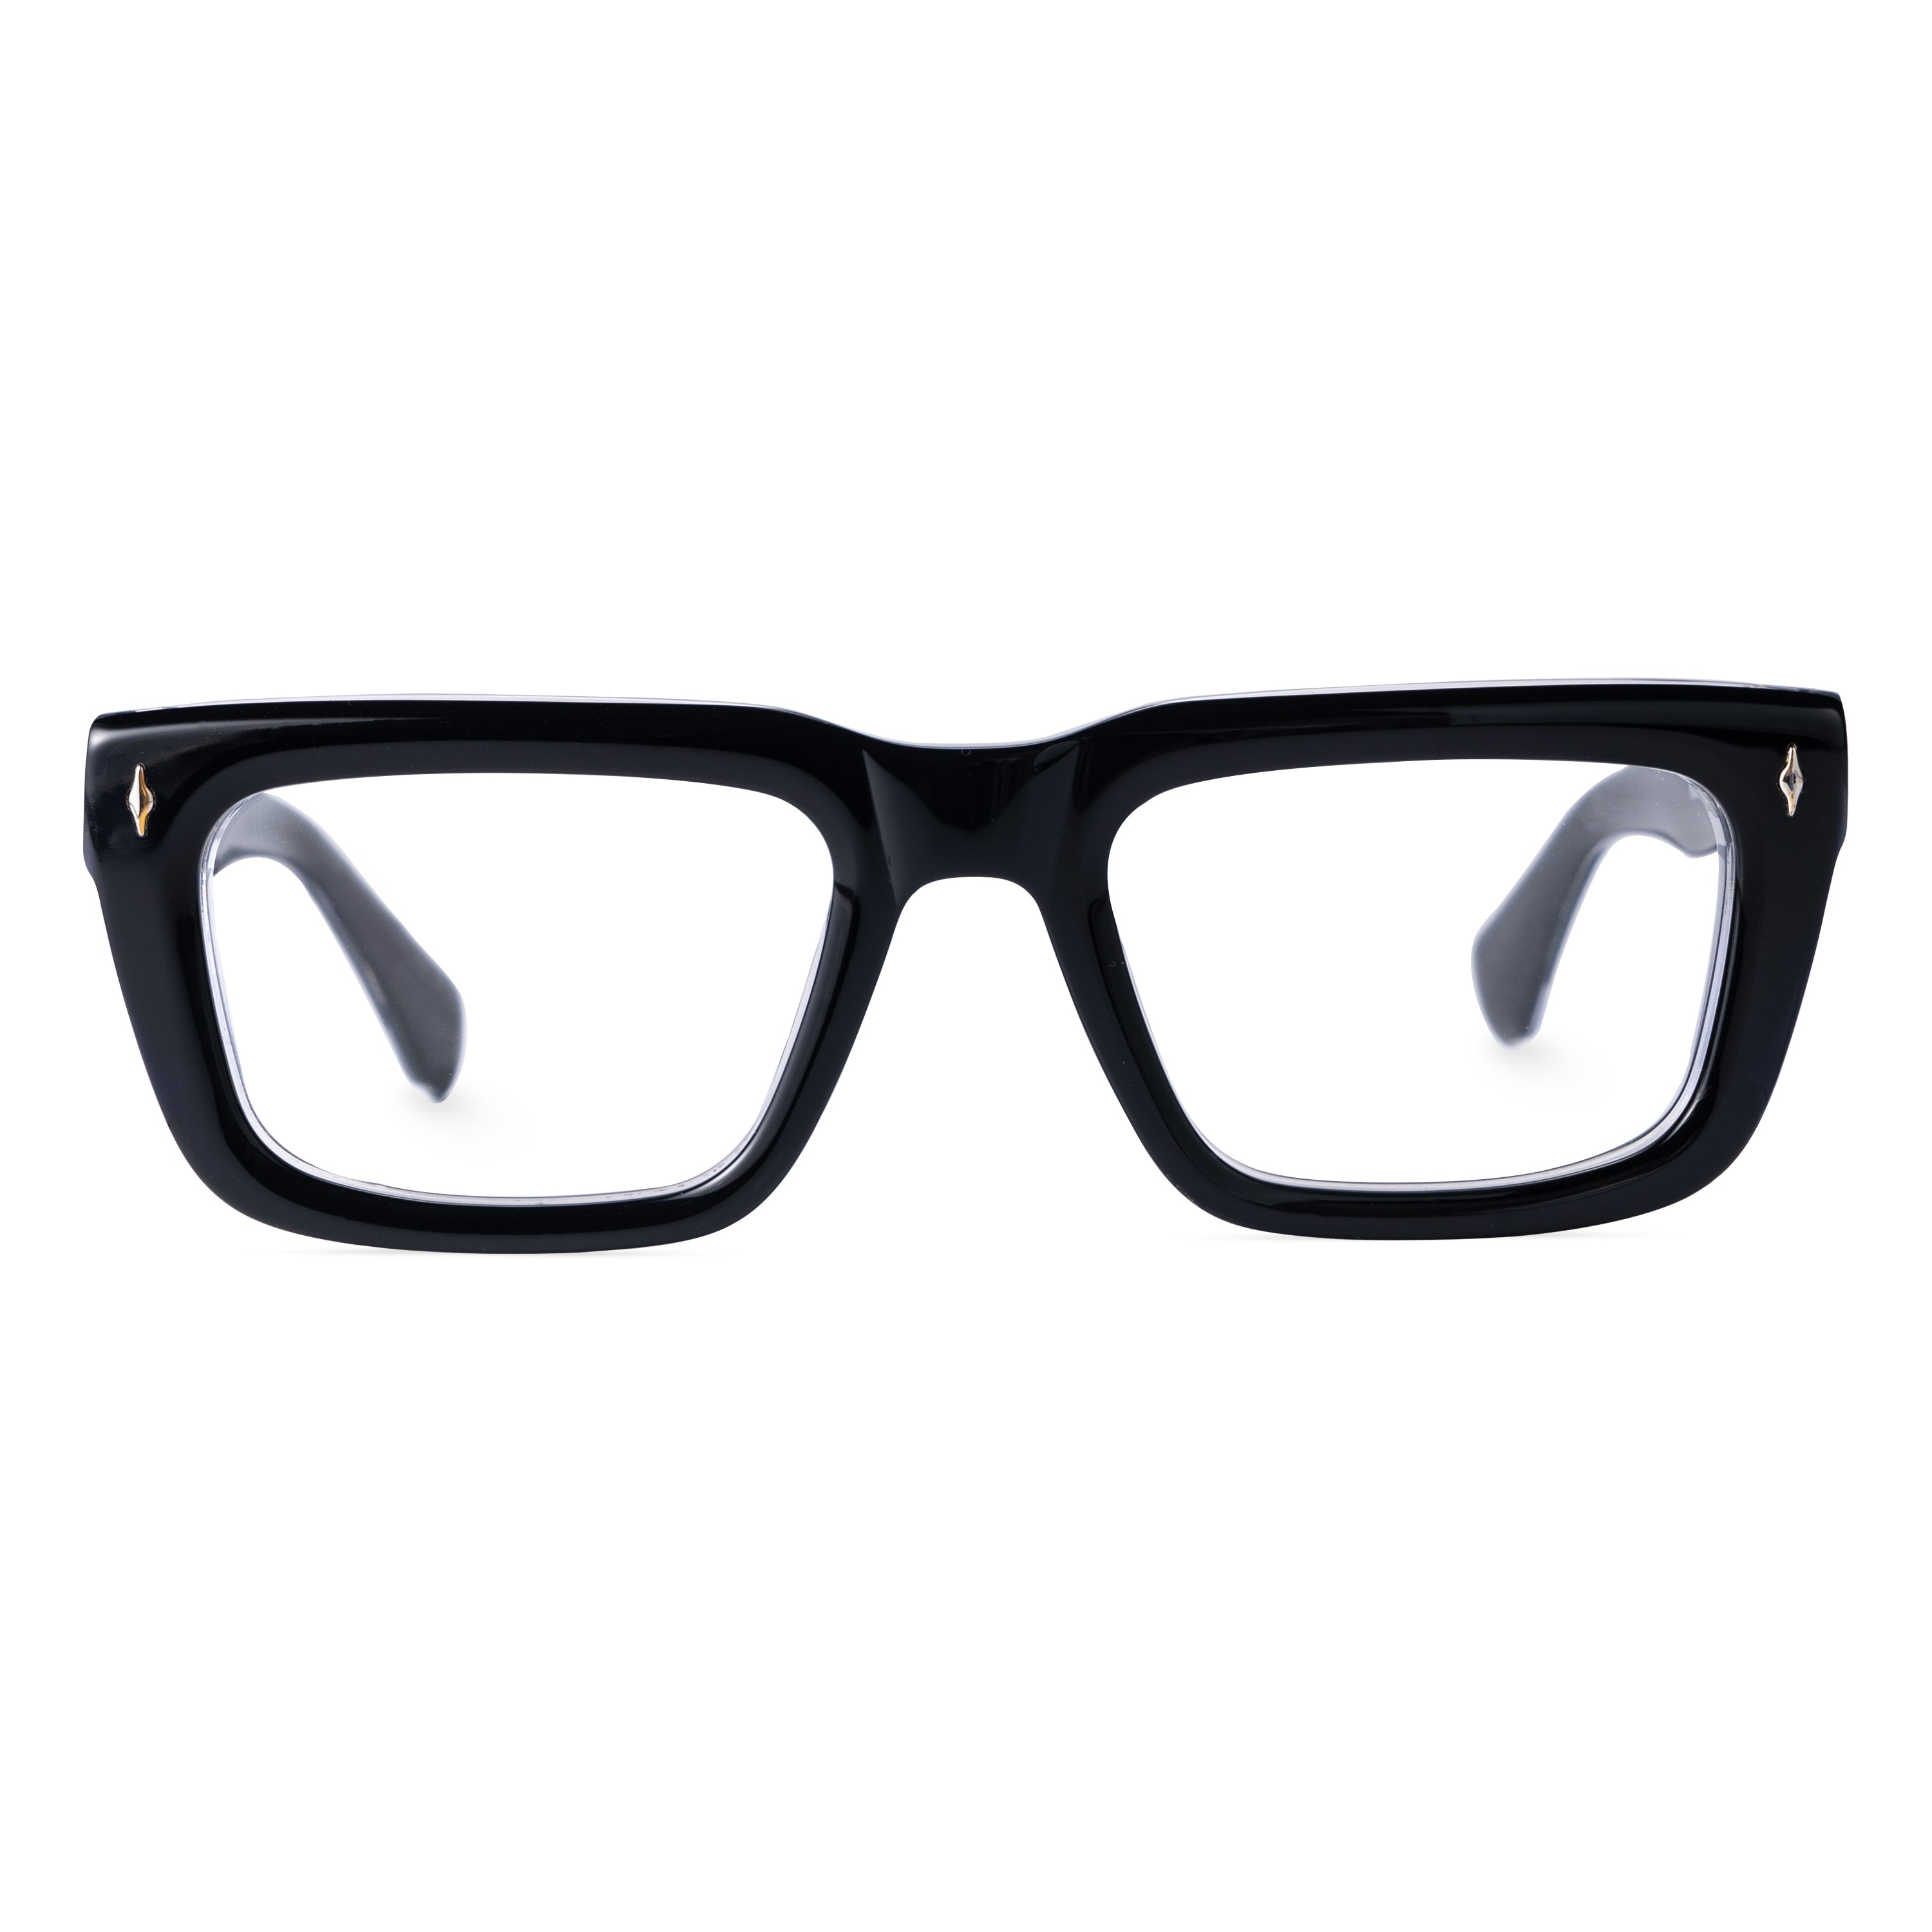 ELKLOOK Eyeglasses 5 Day Rush Delivery